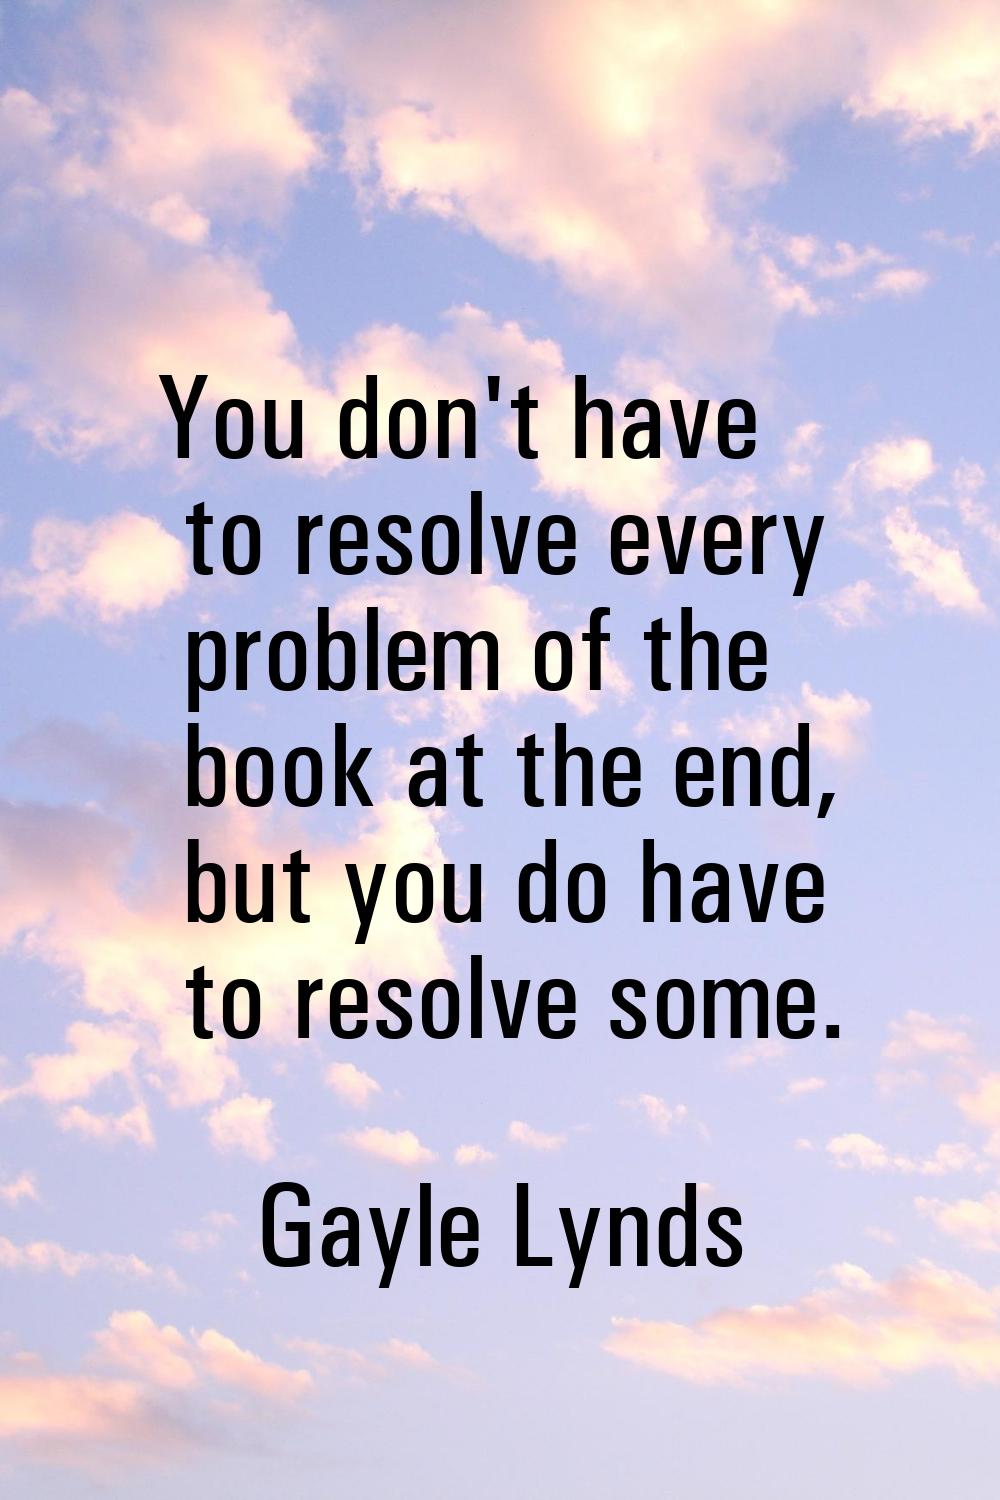 You don't have to resolve every problem of the book at the end, but you do have to resolve some.